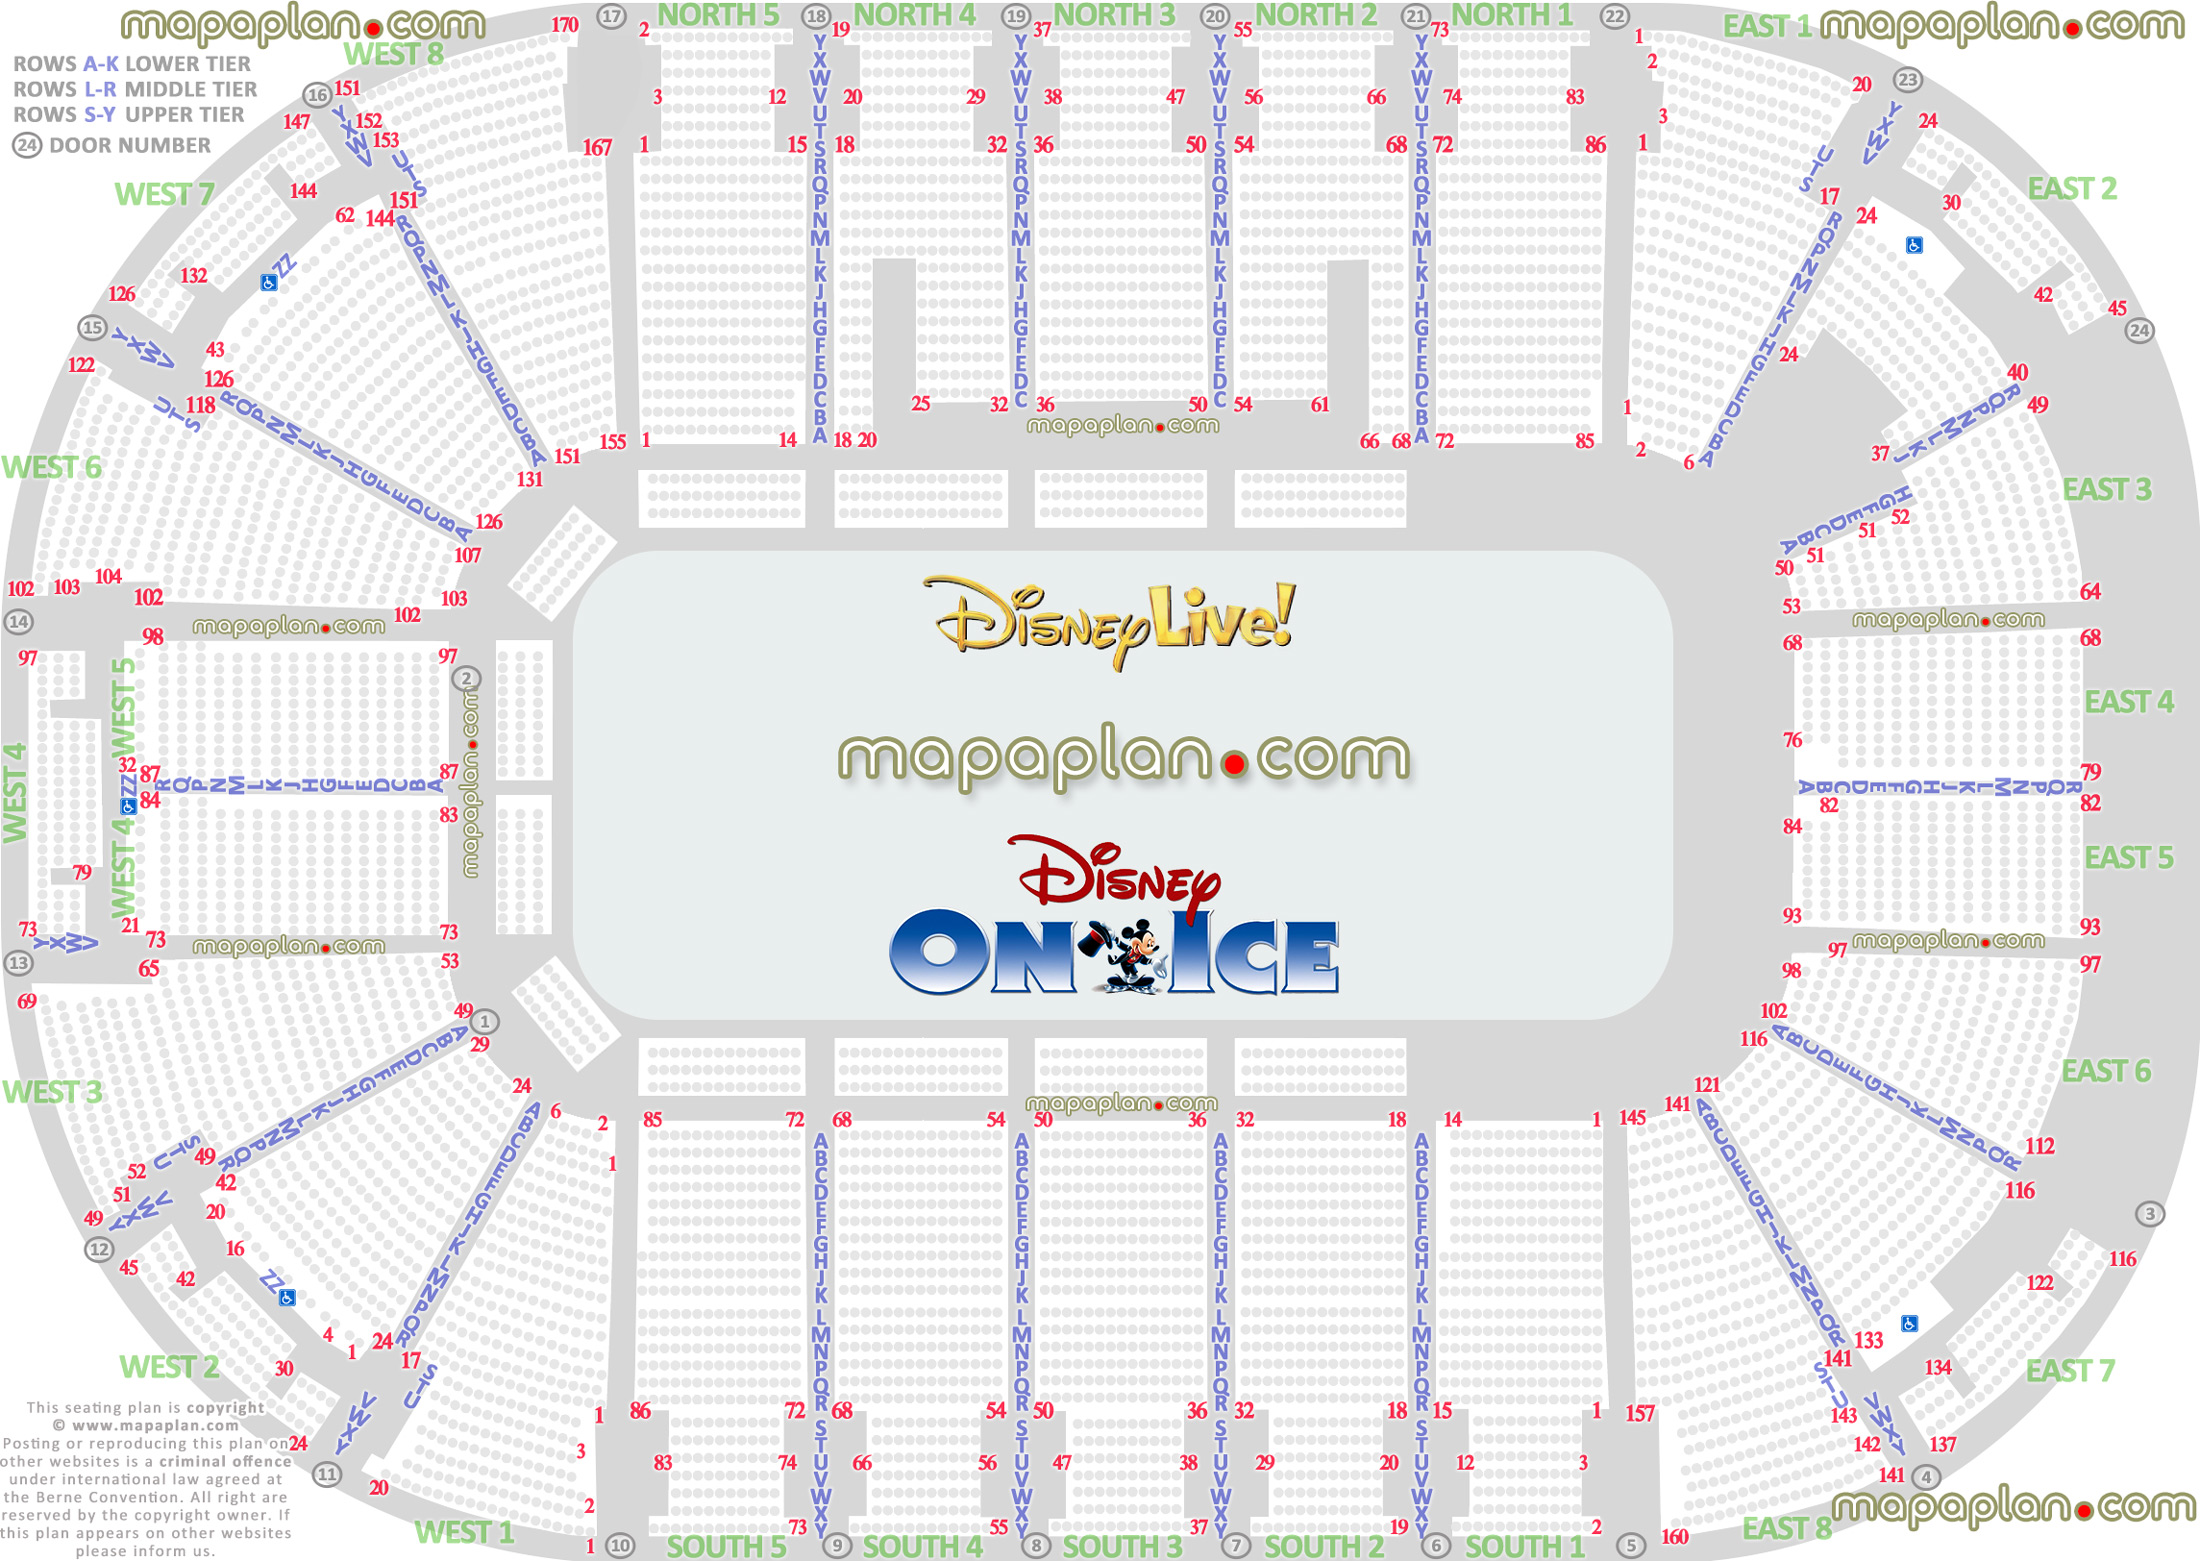 disney live ice arena chart best seat finder 3d guide tool precise detailed aisle row numbering location data ice rink event floor level lower middle upper balcony terrace seating Belfast Odyssey SSE Arena seating plan